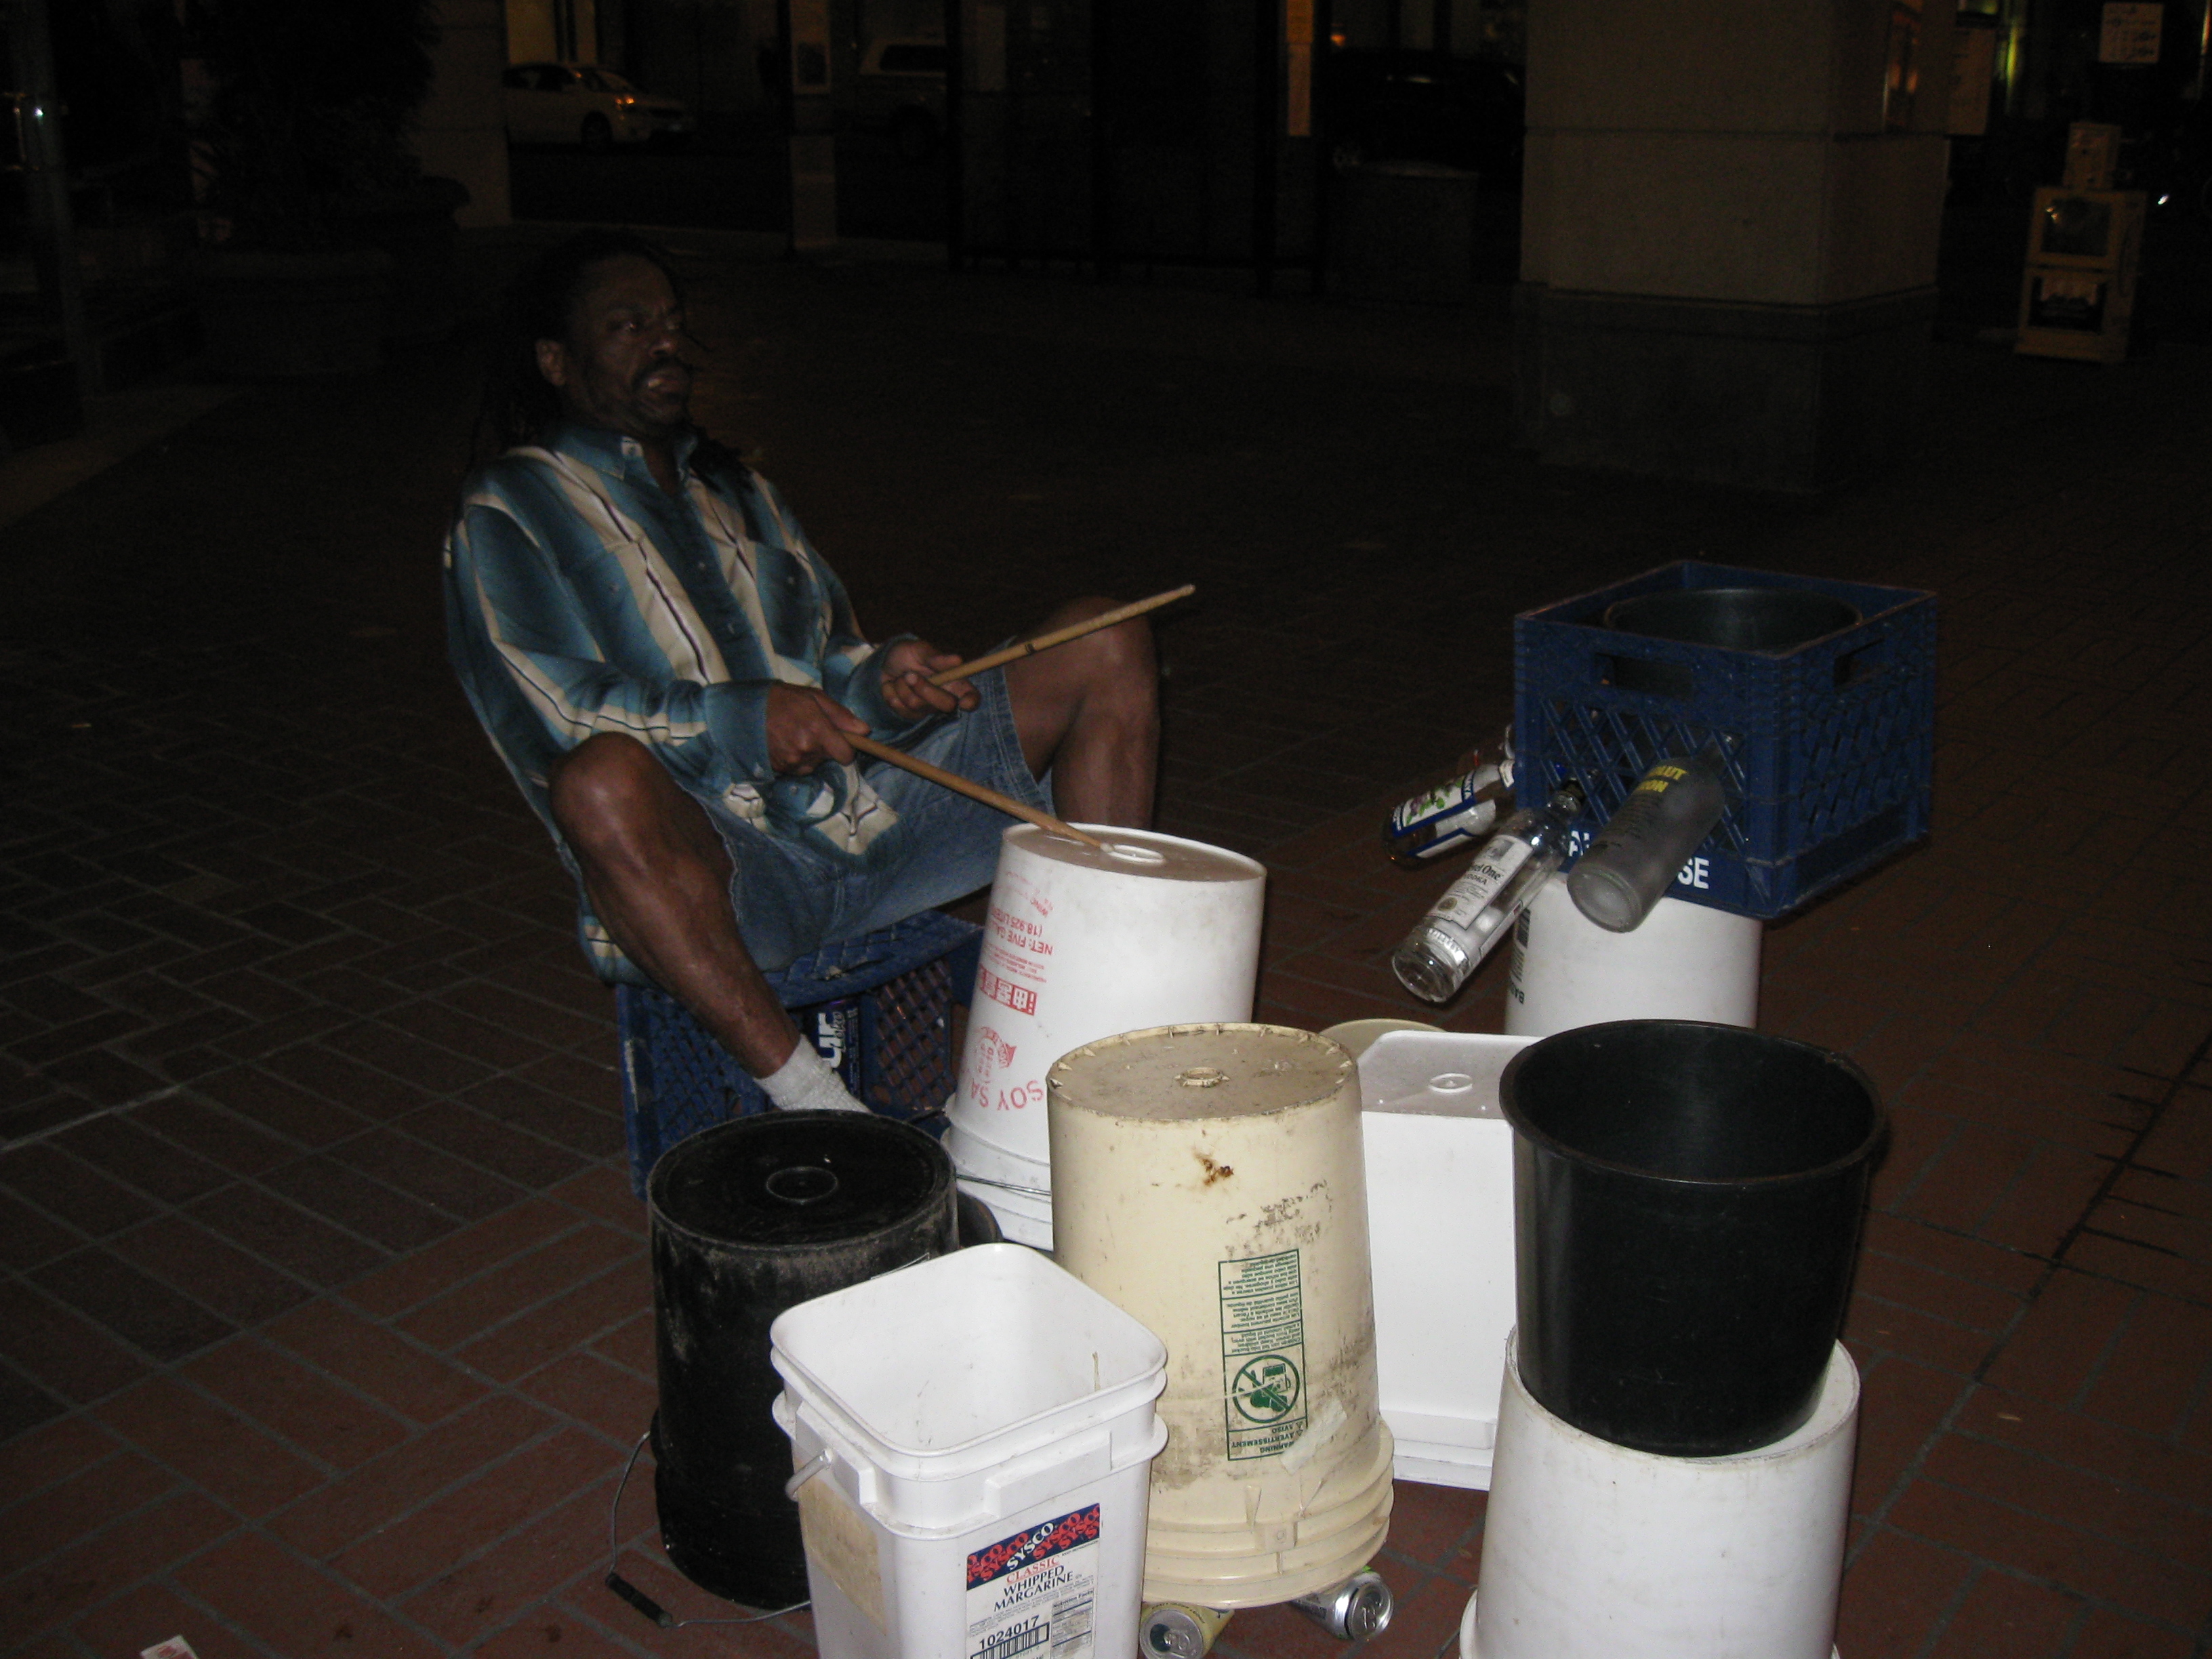 Street performer with ad hoc drums at night photo